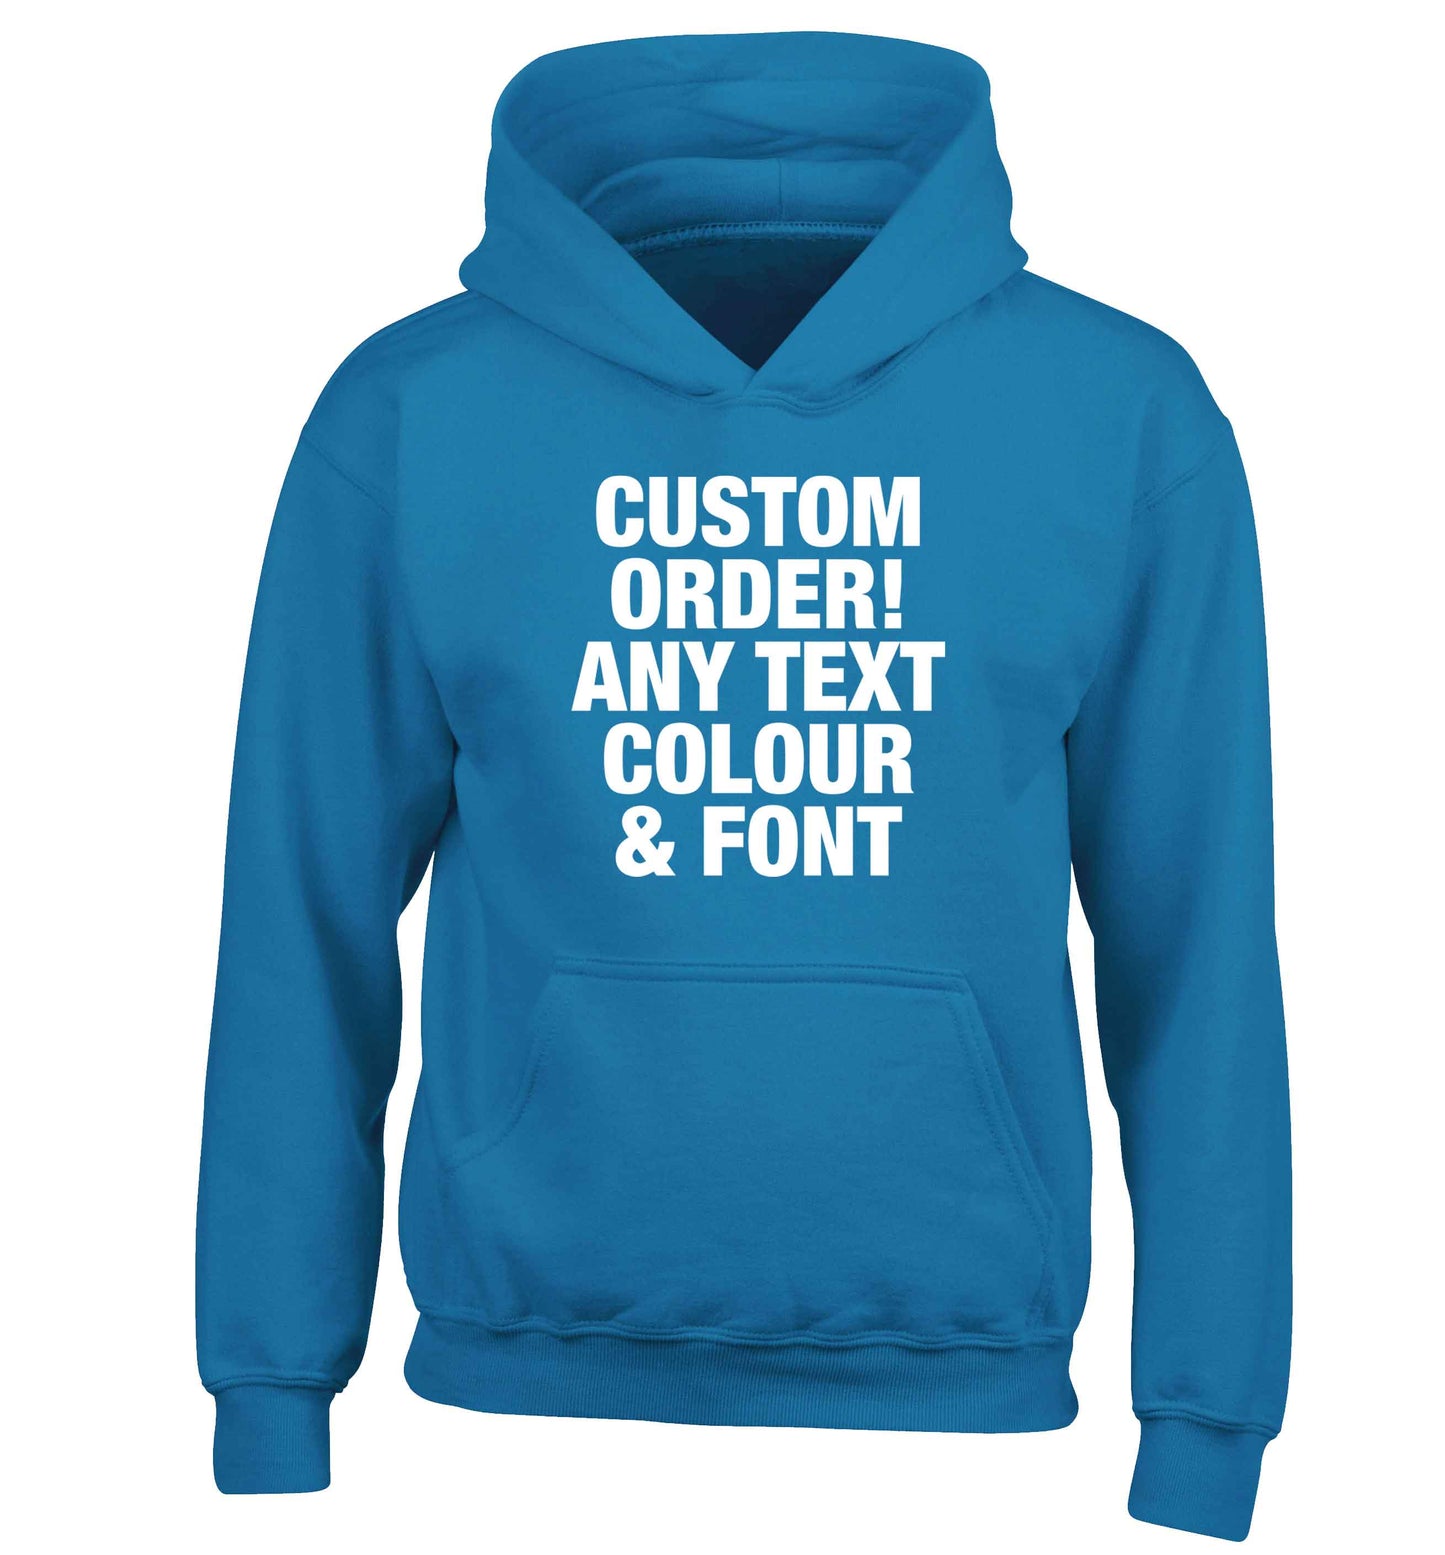 Custom order any text colour and font children's blue hoodie 12-13 Years